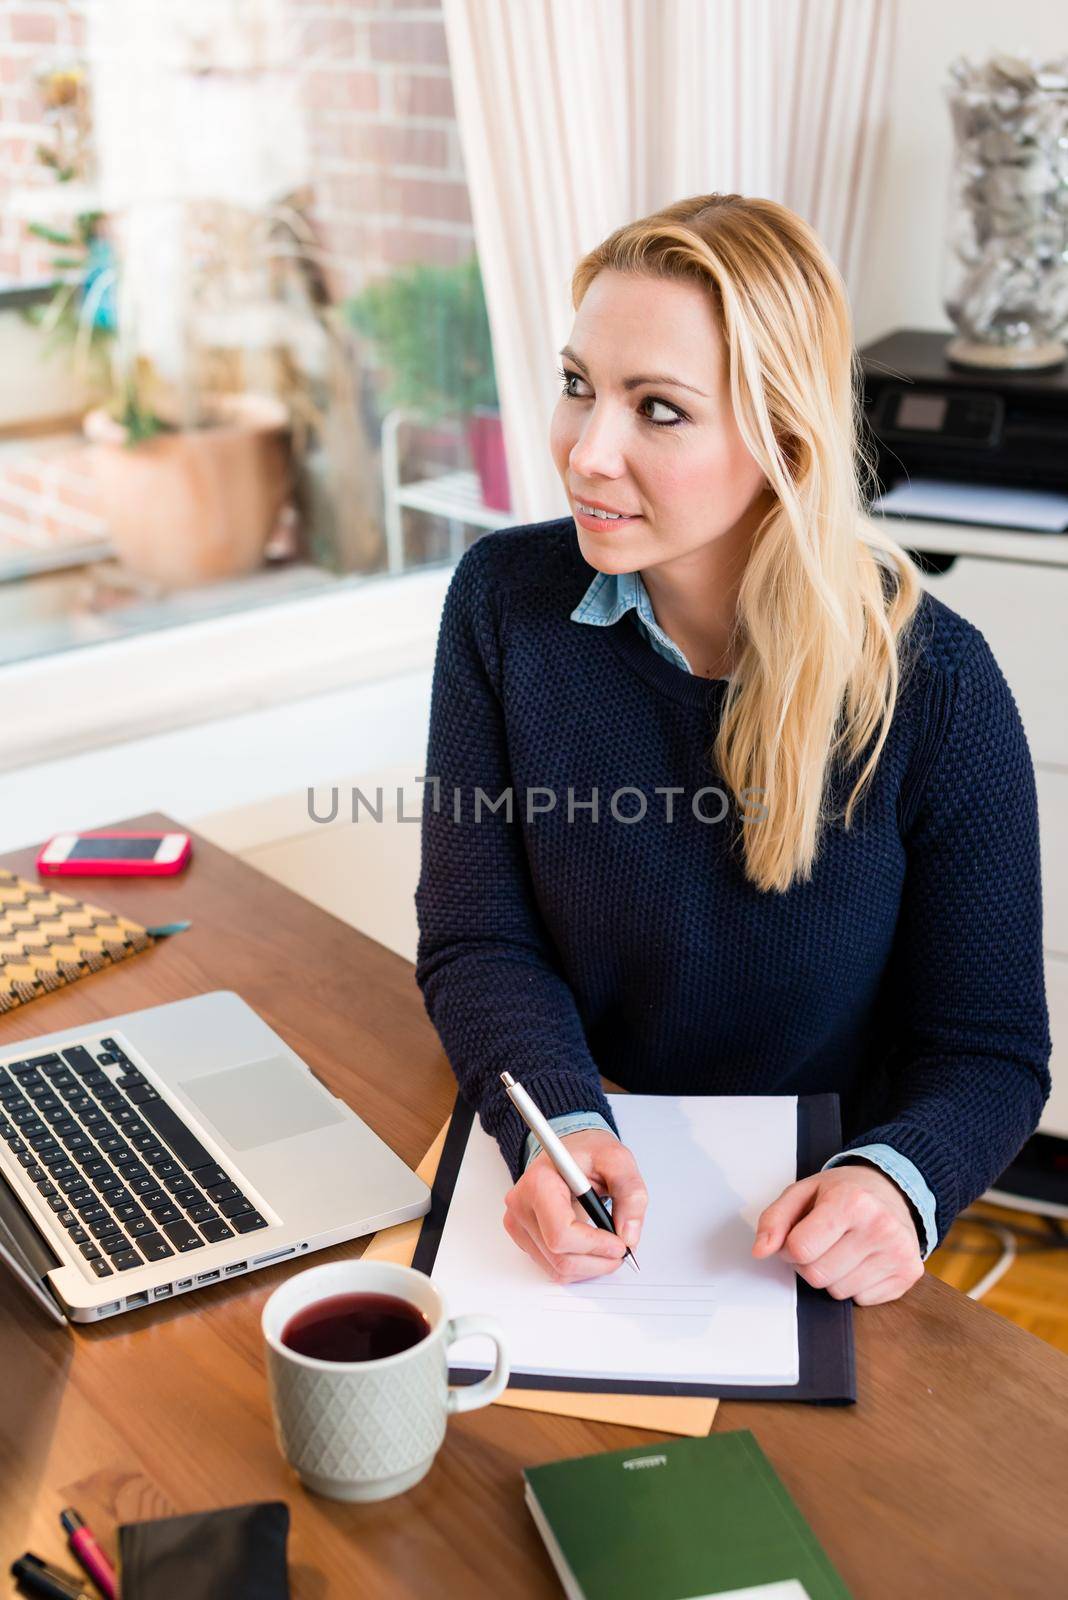 Portrait of a contemplating woman at her desk writing on paper